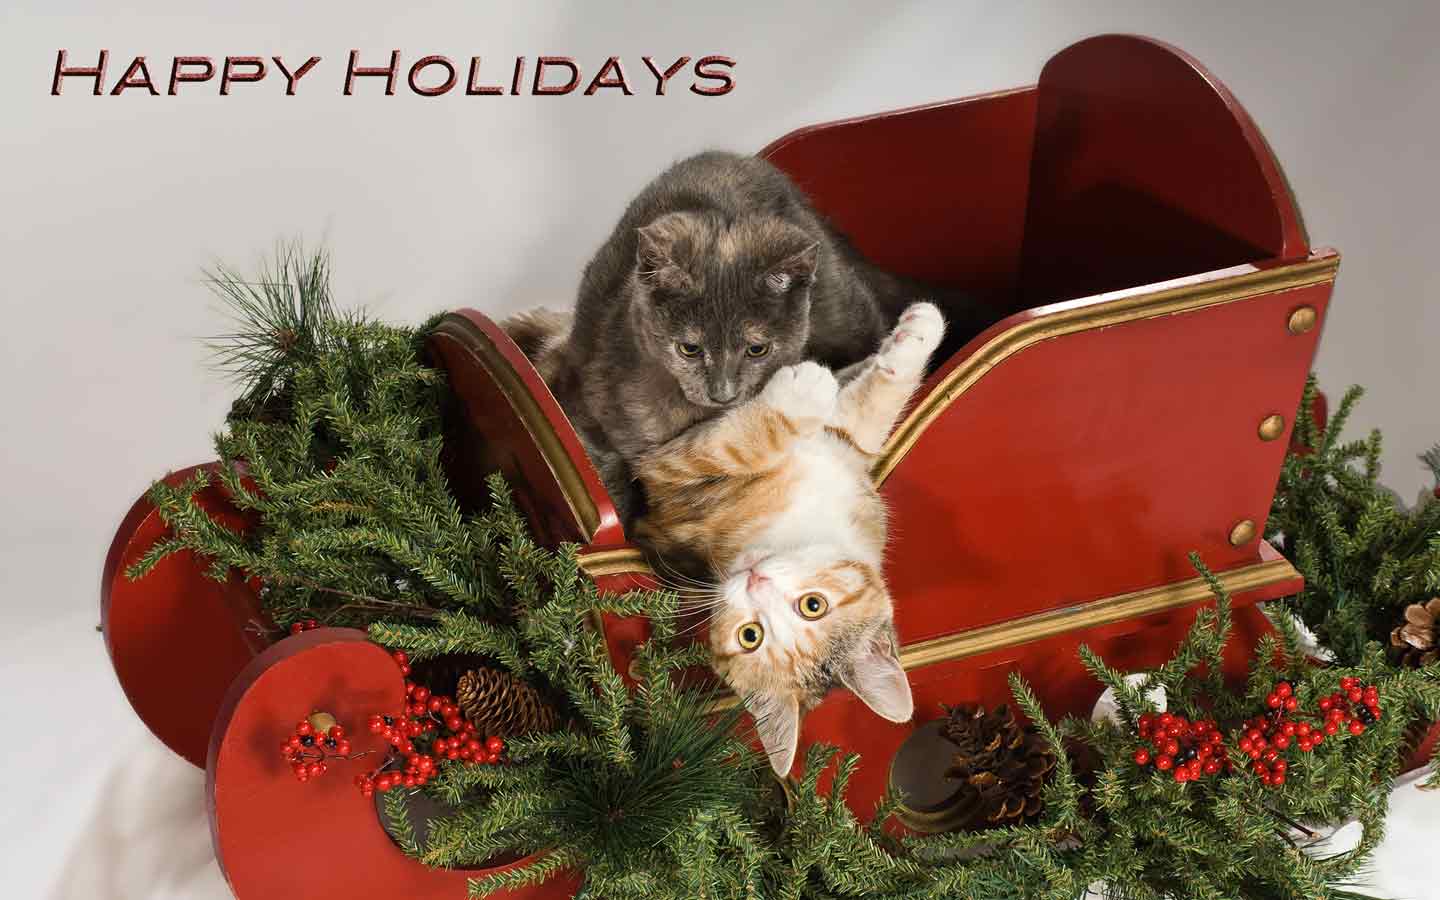 Two cats are playing in a sleigh with christmas decorations.